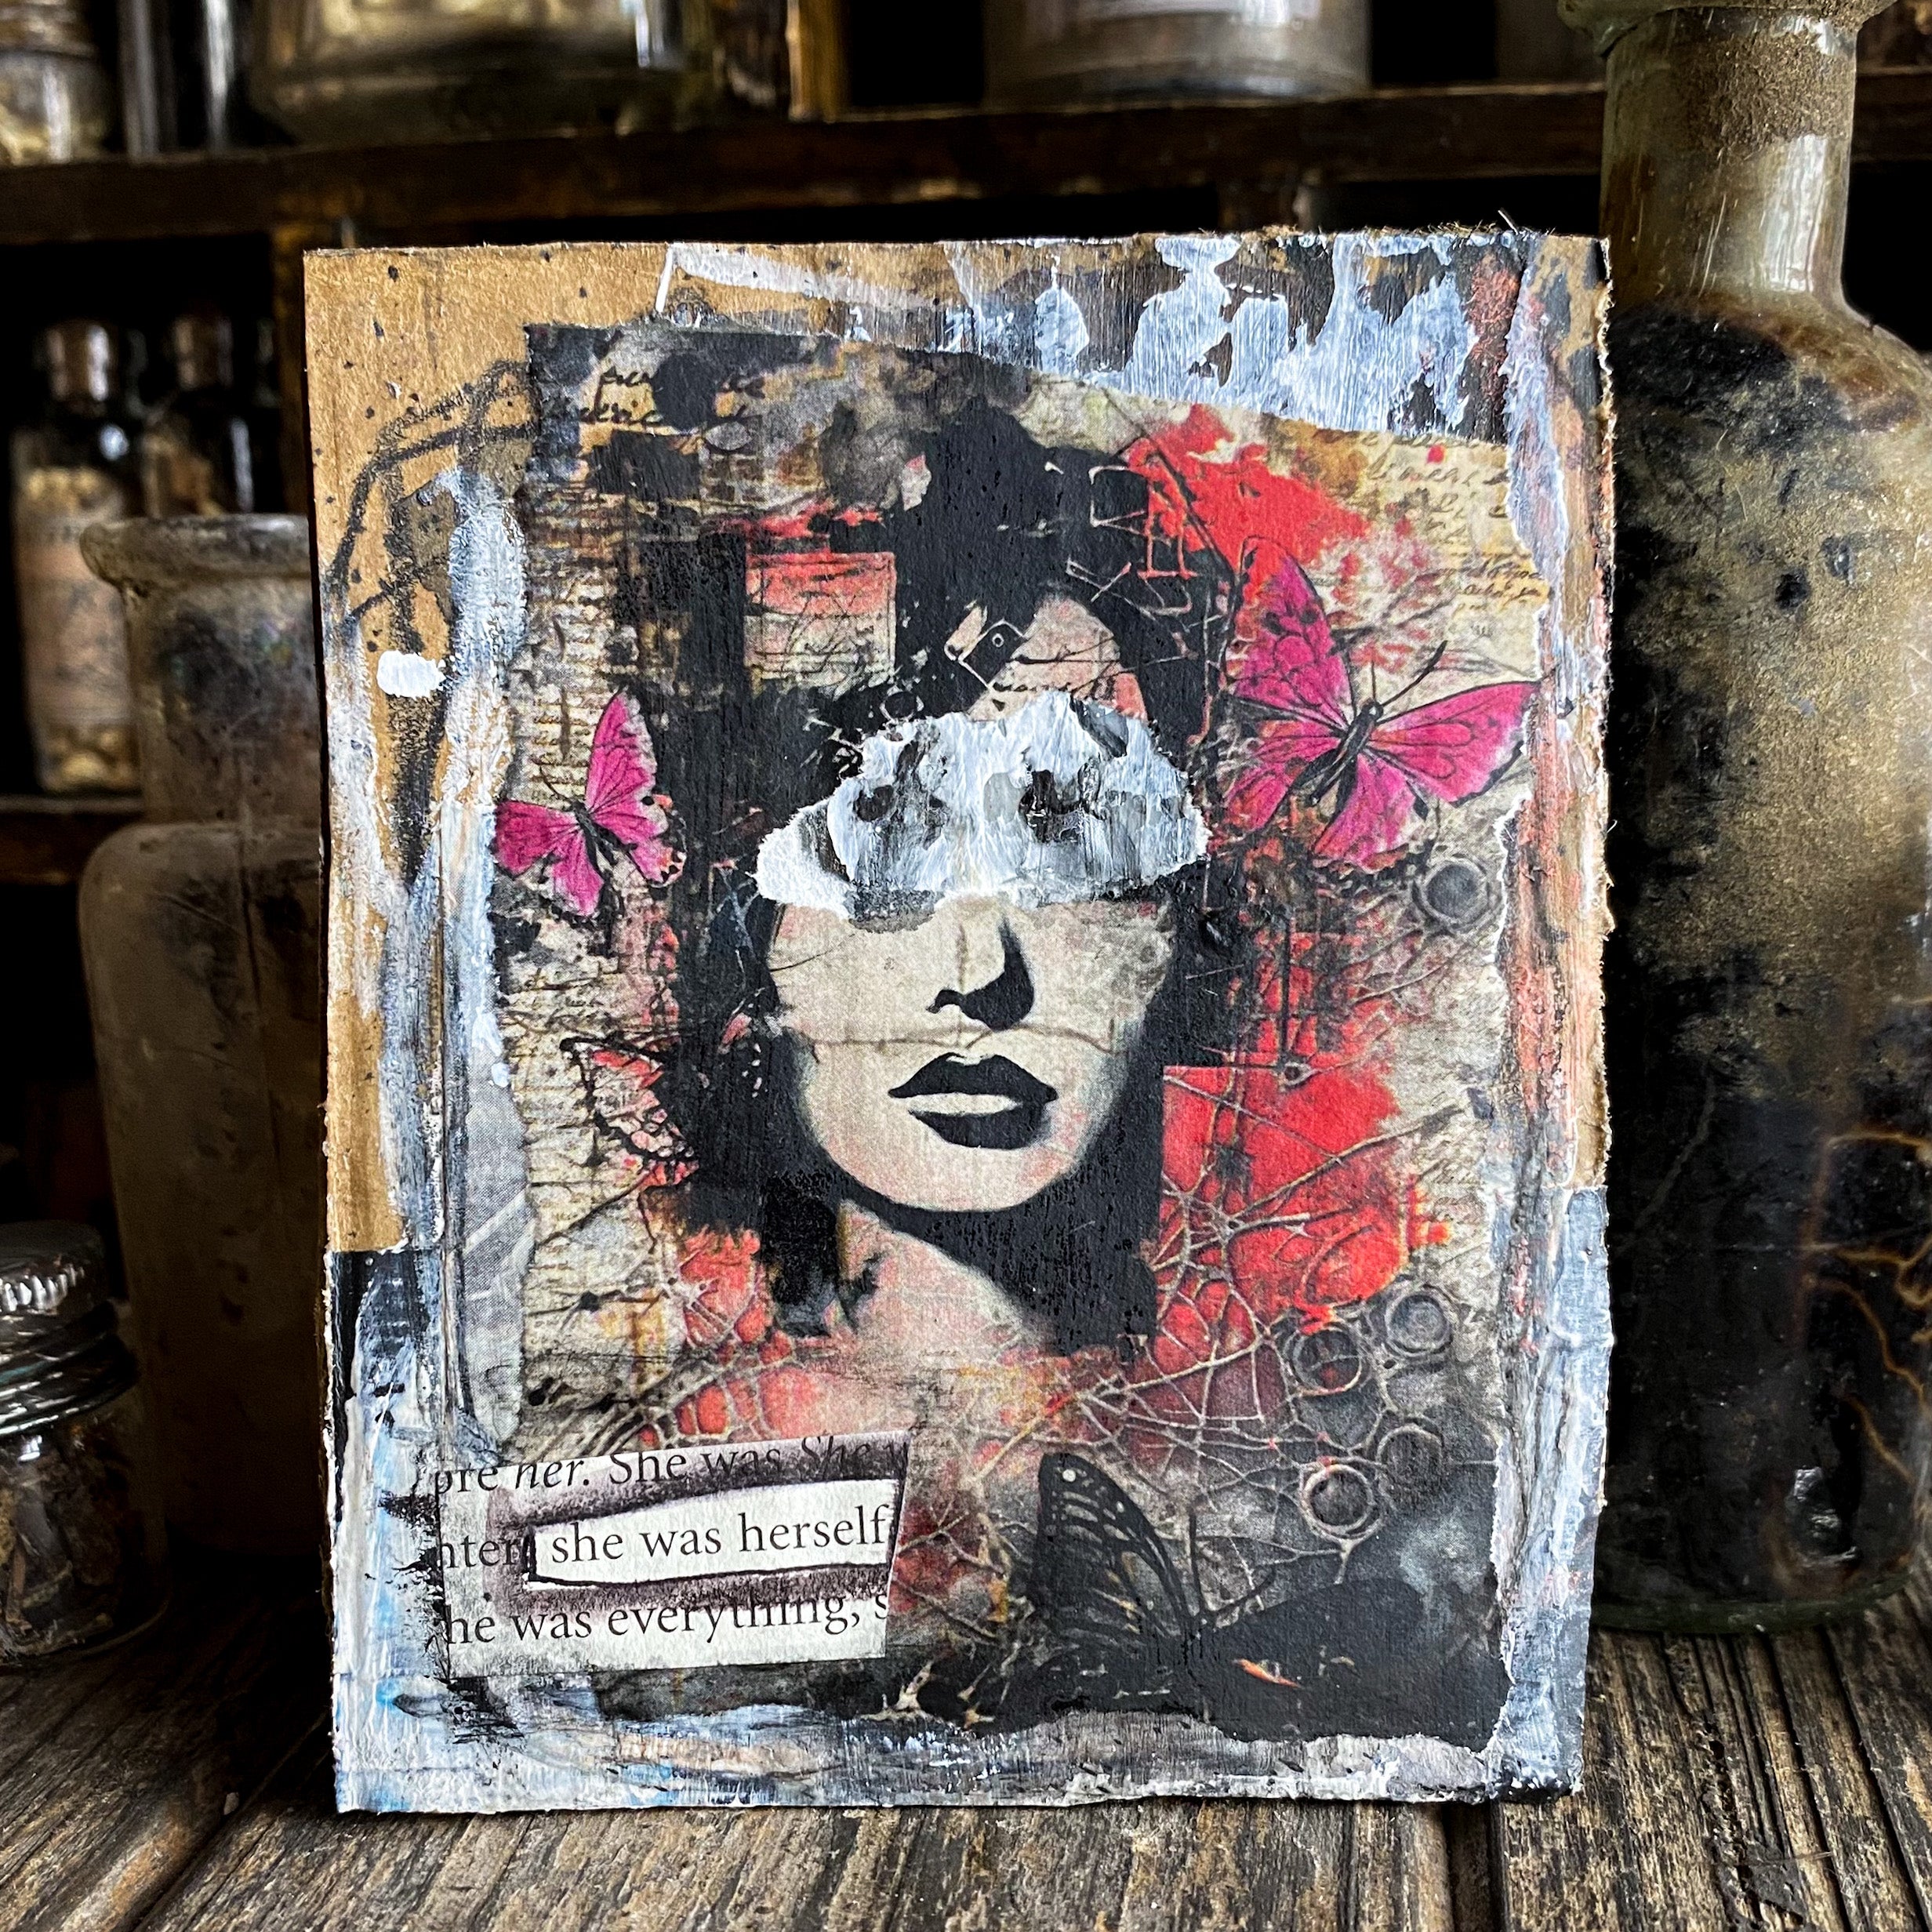 She Was Herself - Original Mixed Media Collage